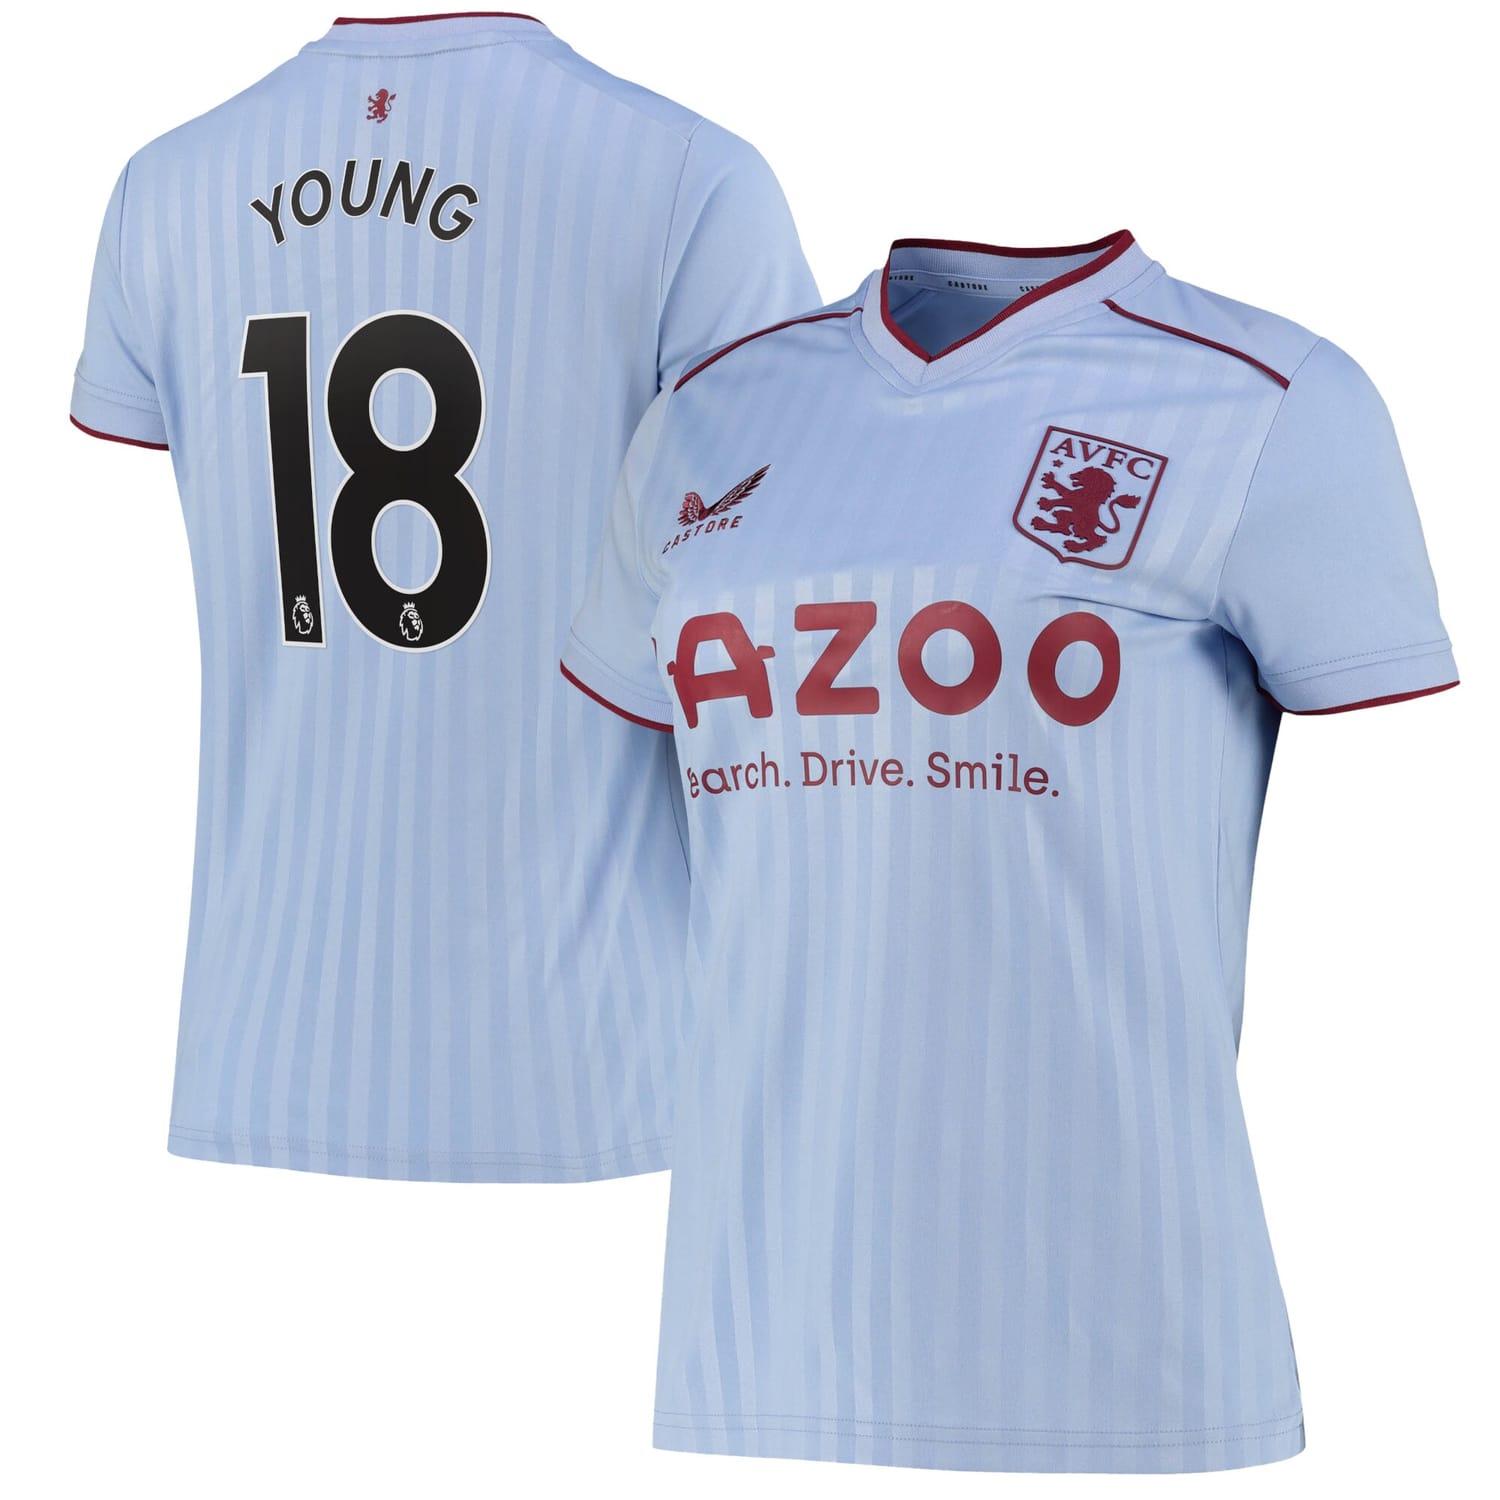 Premier League Ast. Villa Away Jersey Shirt 2022-23 player Ashley Young 18 printing for Women